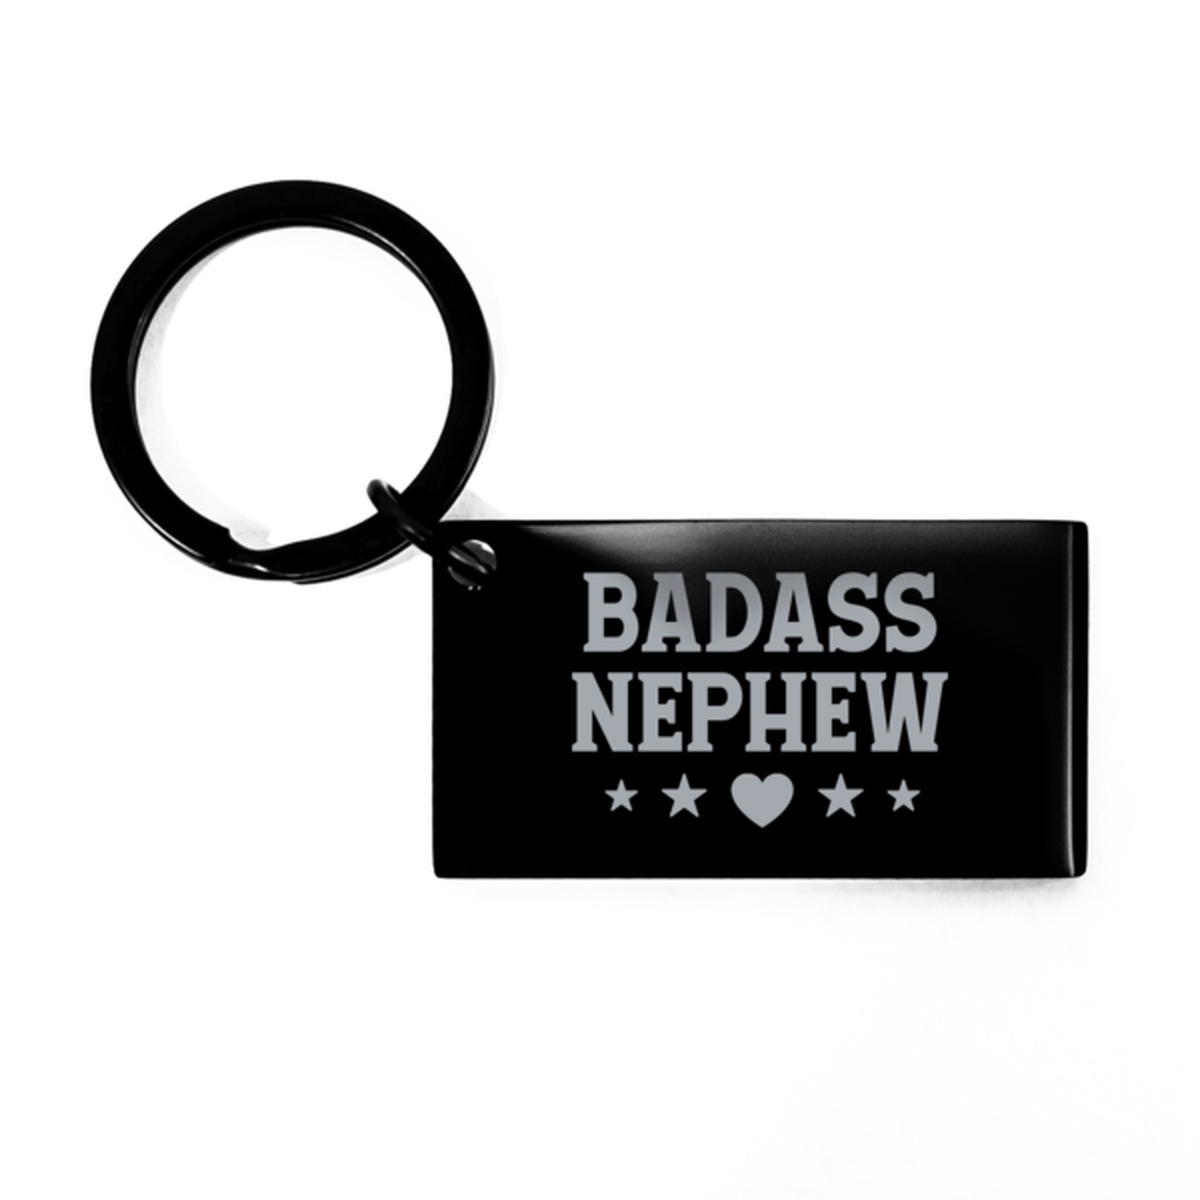 Nephew Black Keychain, Badass Nephew, Funny Family Gifts  Keyring For Nephew From Aunt Uncle